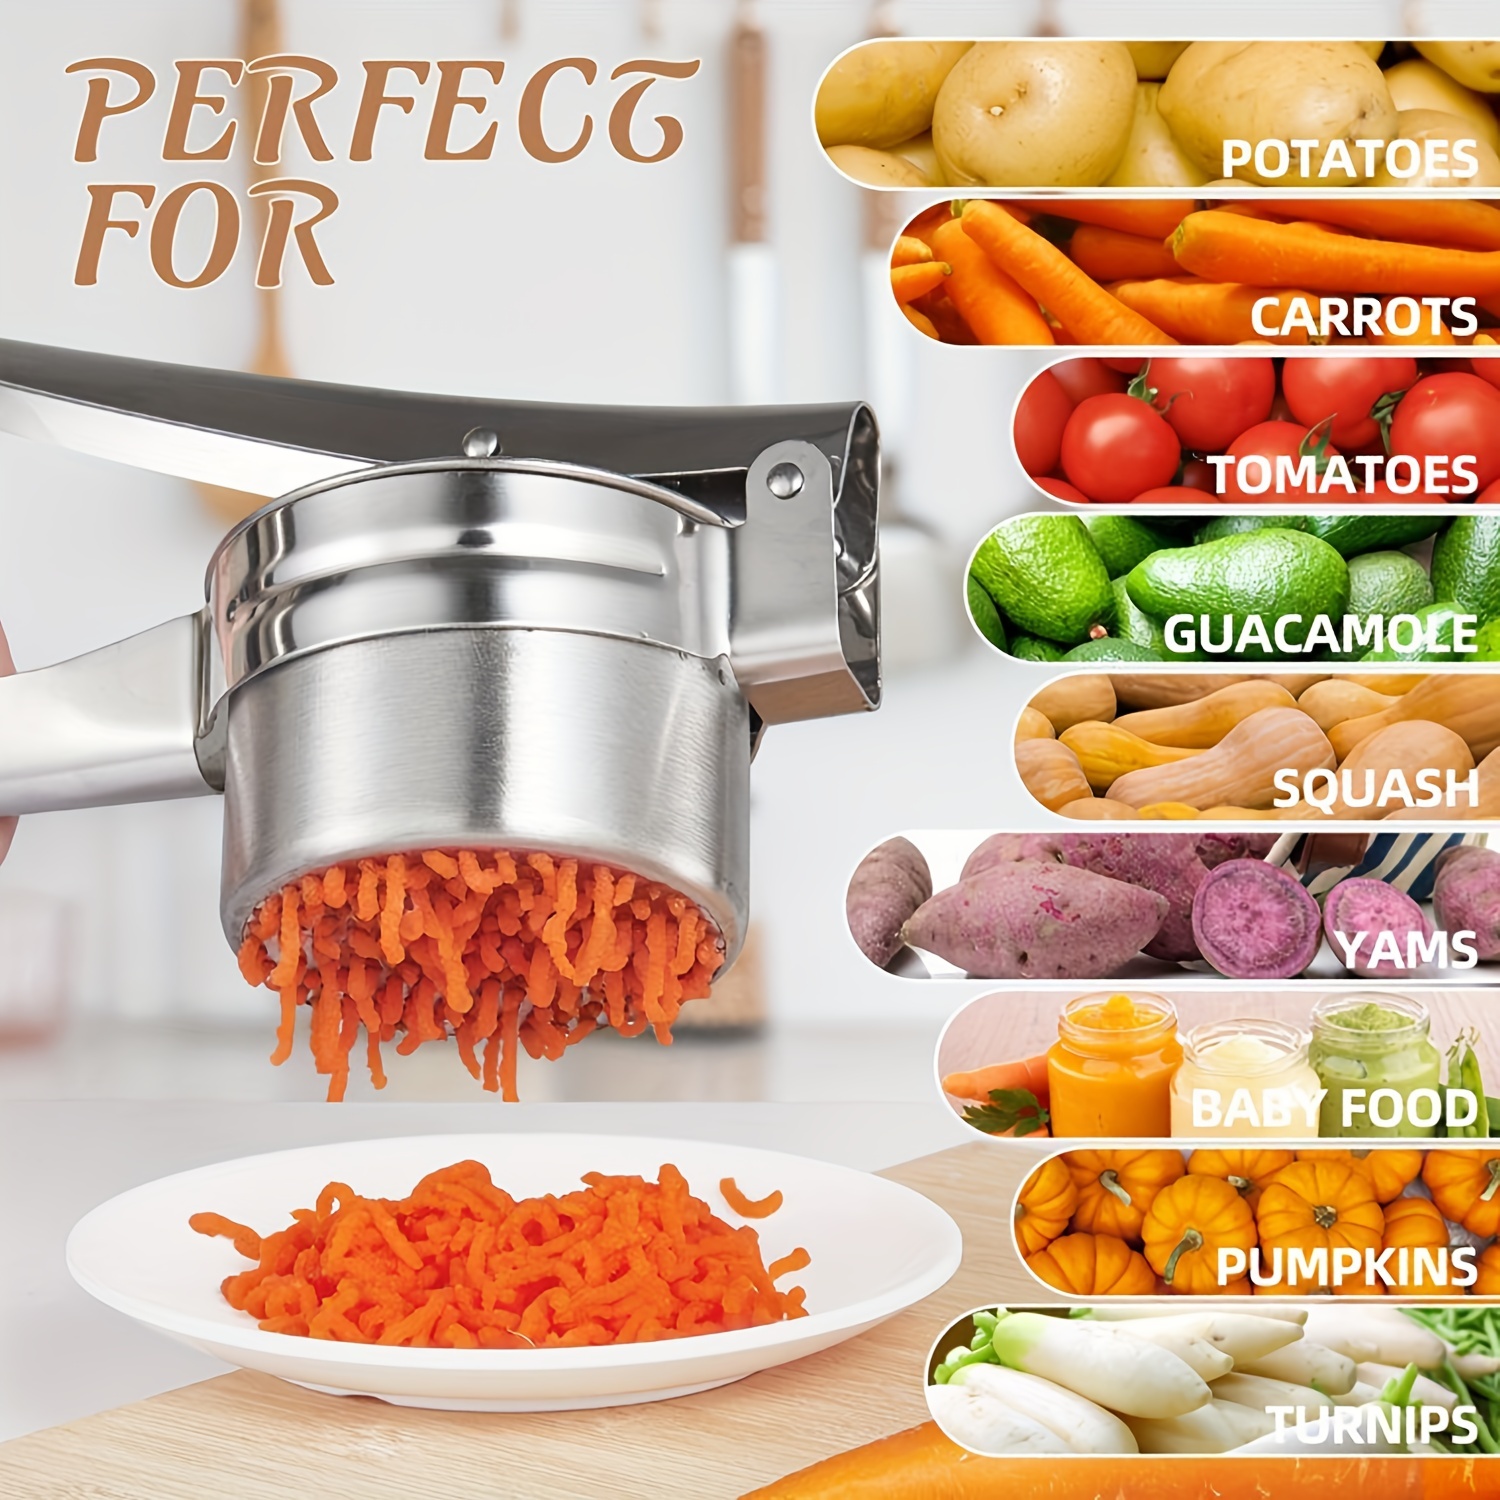 Potato Ricer Stainless Steel Potato Masher For Perfect Fluffy Mashed  Potatoes - Hand Held Kitchen Press Gadget Baby Food - Buy Potato Ricer  Stainless Steel Potato Masher For Perfect Fluffy Mashed Potatoes 